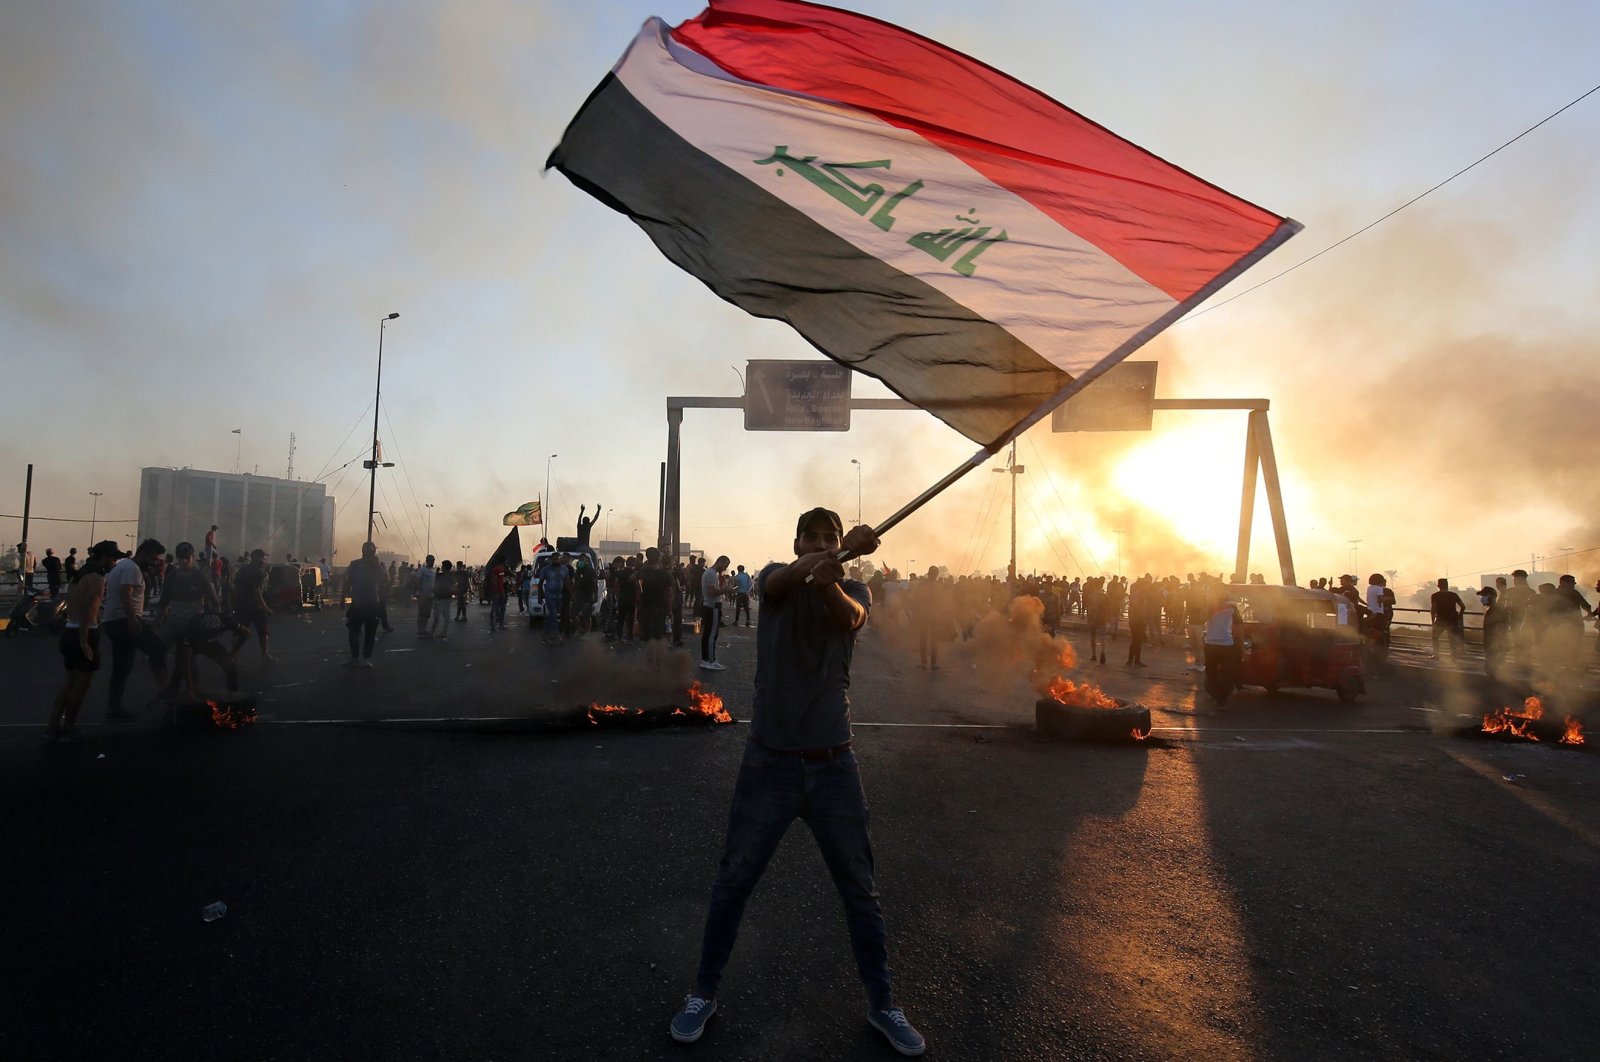 An Iraqi protester waves the national flag during a demonstration against state corruption, failing public services and unemployment in the Iraqi capital Baghdad, Oct. 5, 2019. (AFP Photo)